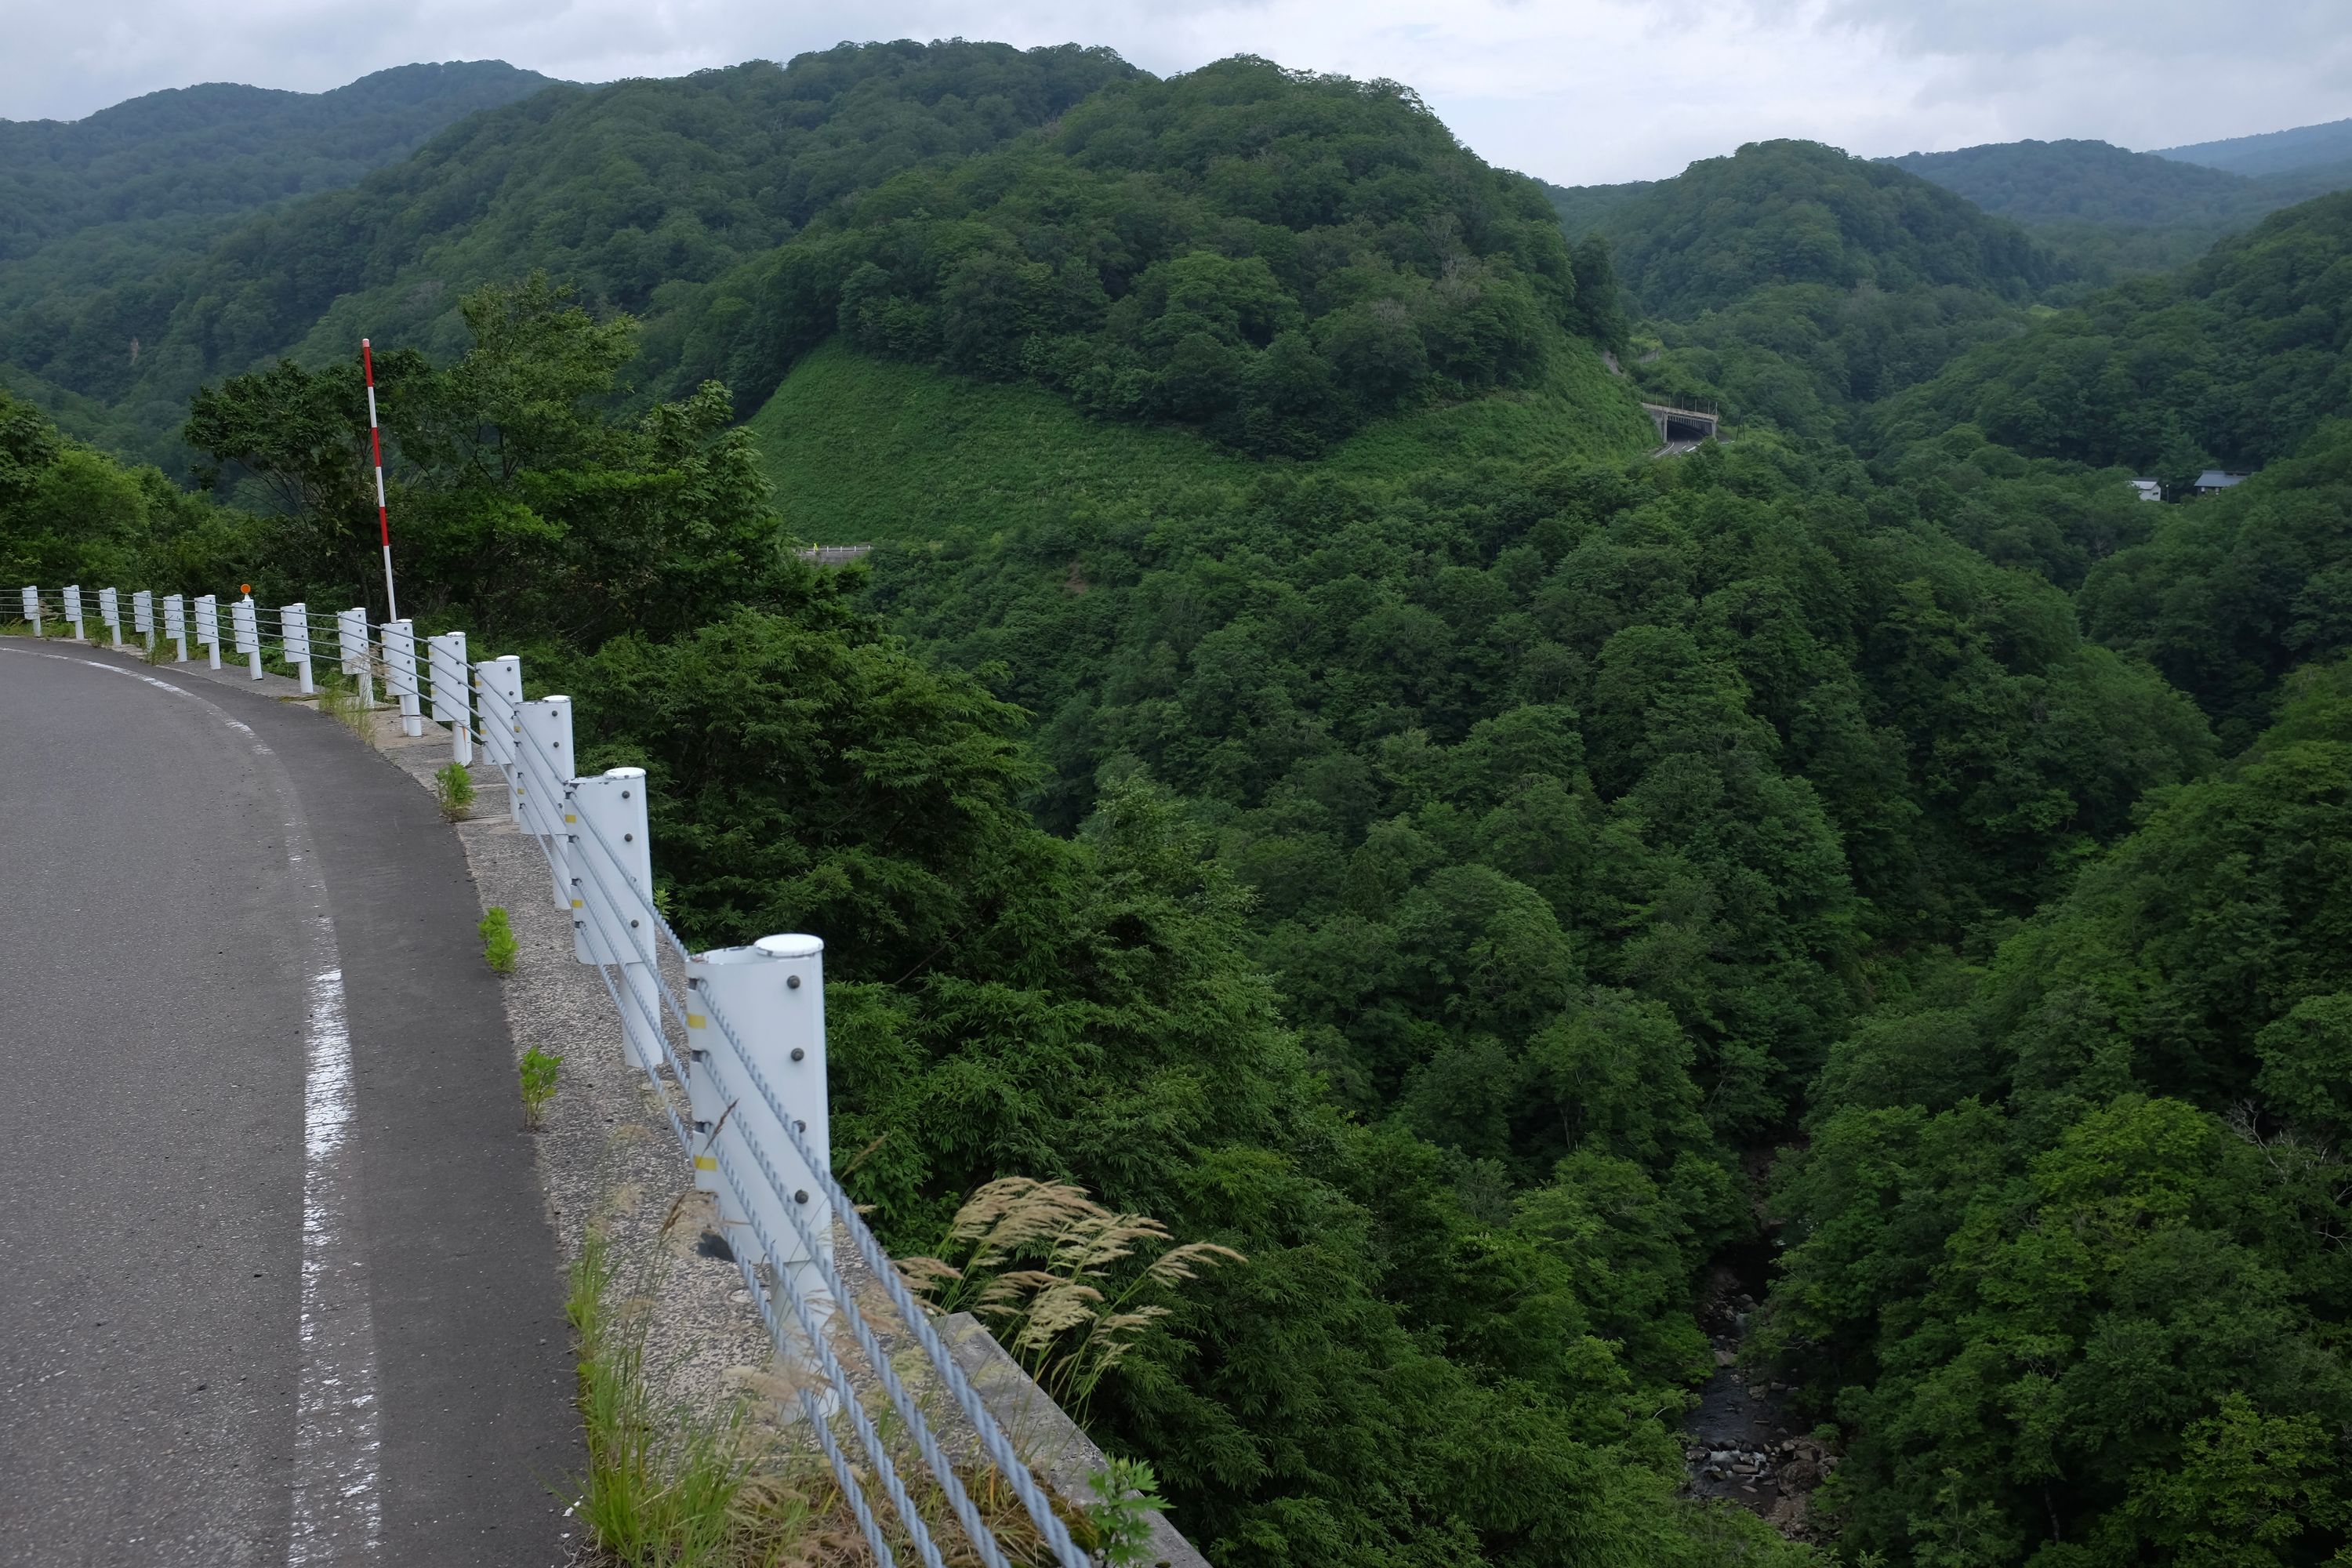 Panorama of a road snaking across heavily forested, steep hills.